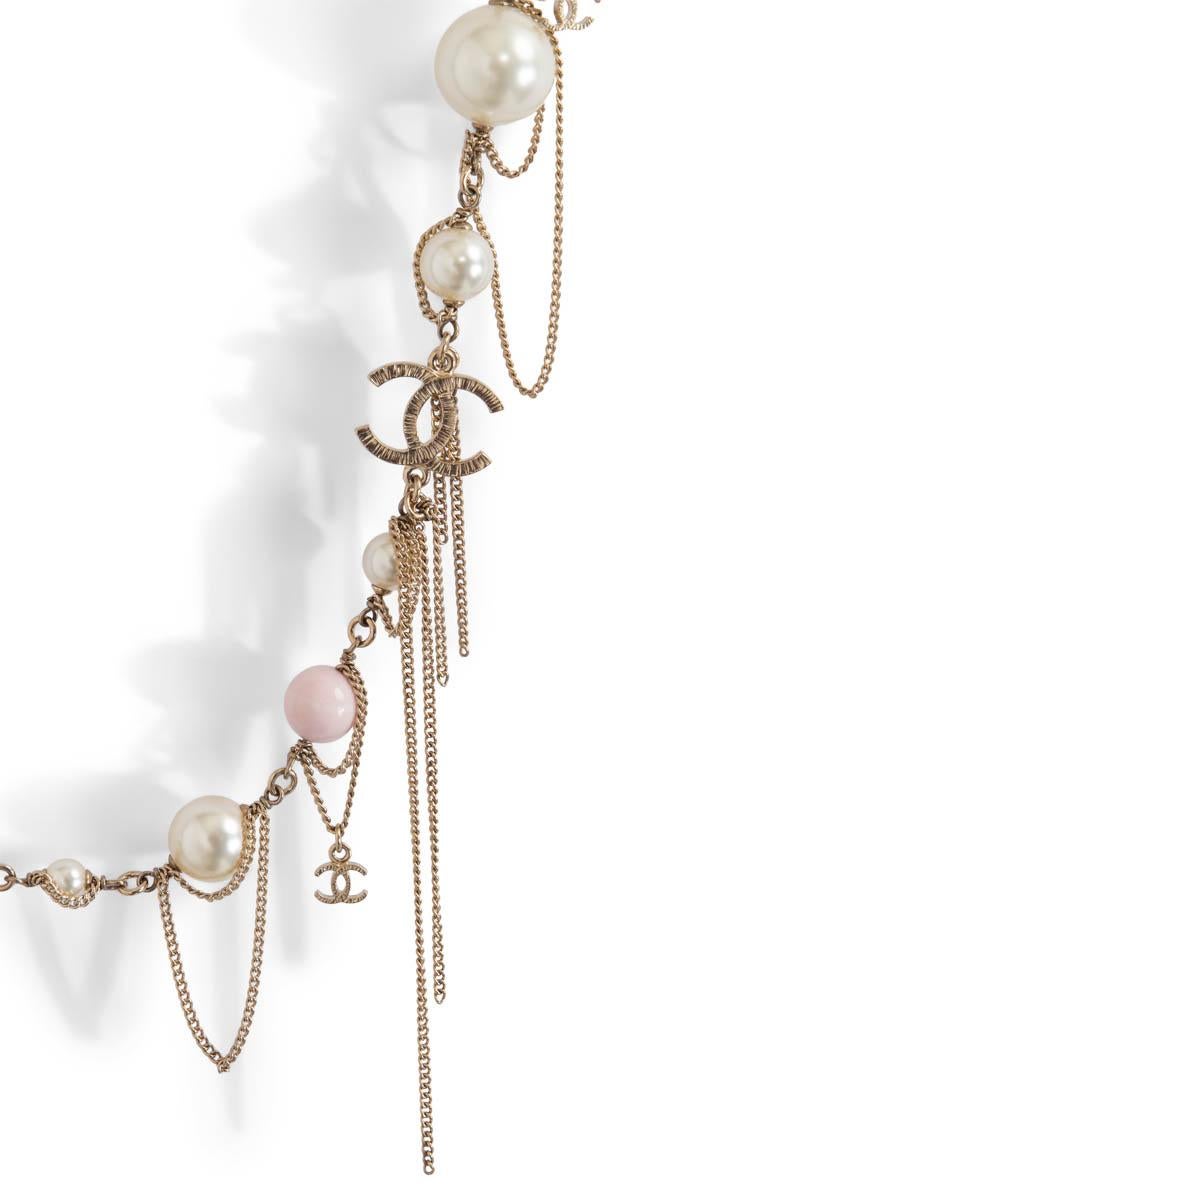 100% authentic Chanel chain necklace in gold-plated metal with CC charm embellished draped chain loops and alternating Gripoix glass beads in semi- transparent and opaque pink, and faux pearls. Ranging from 12mm tp 15mm. Closes with large lobster